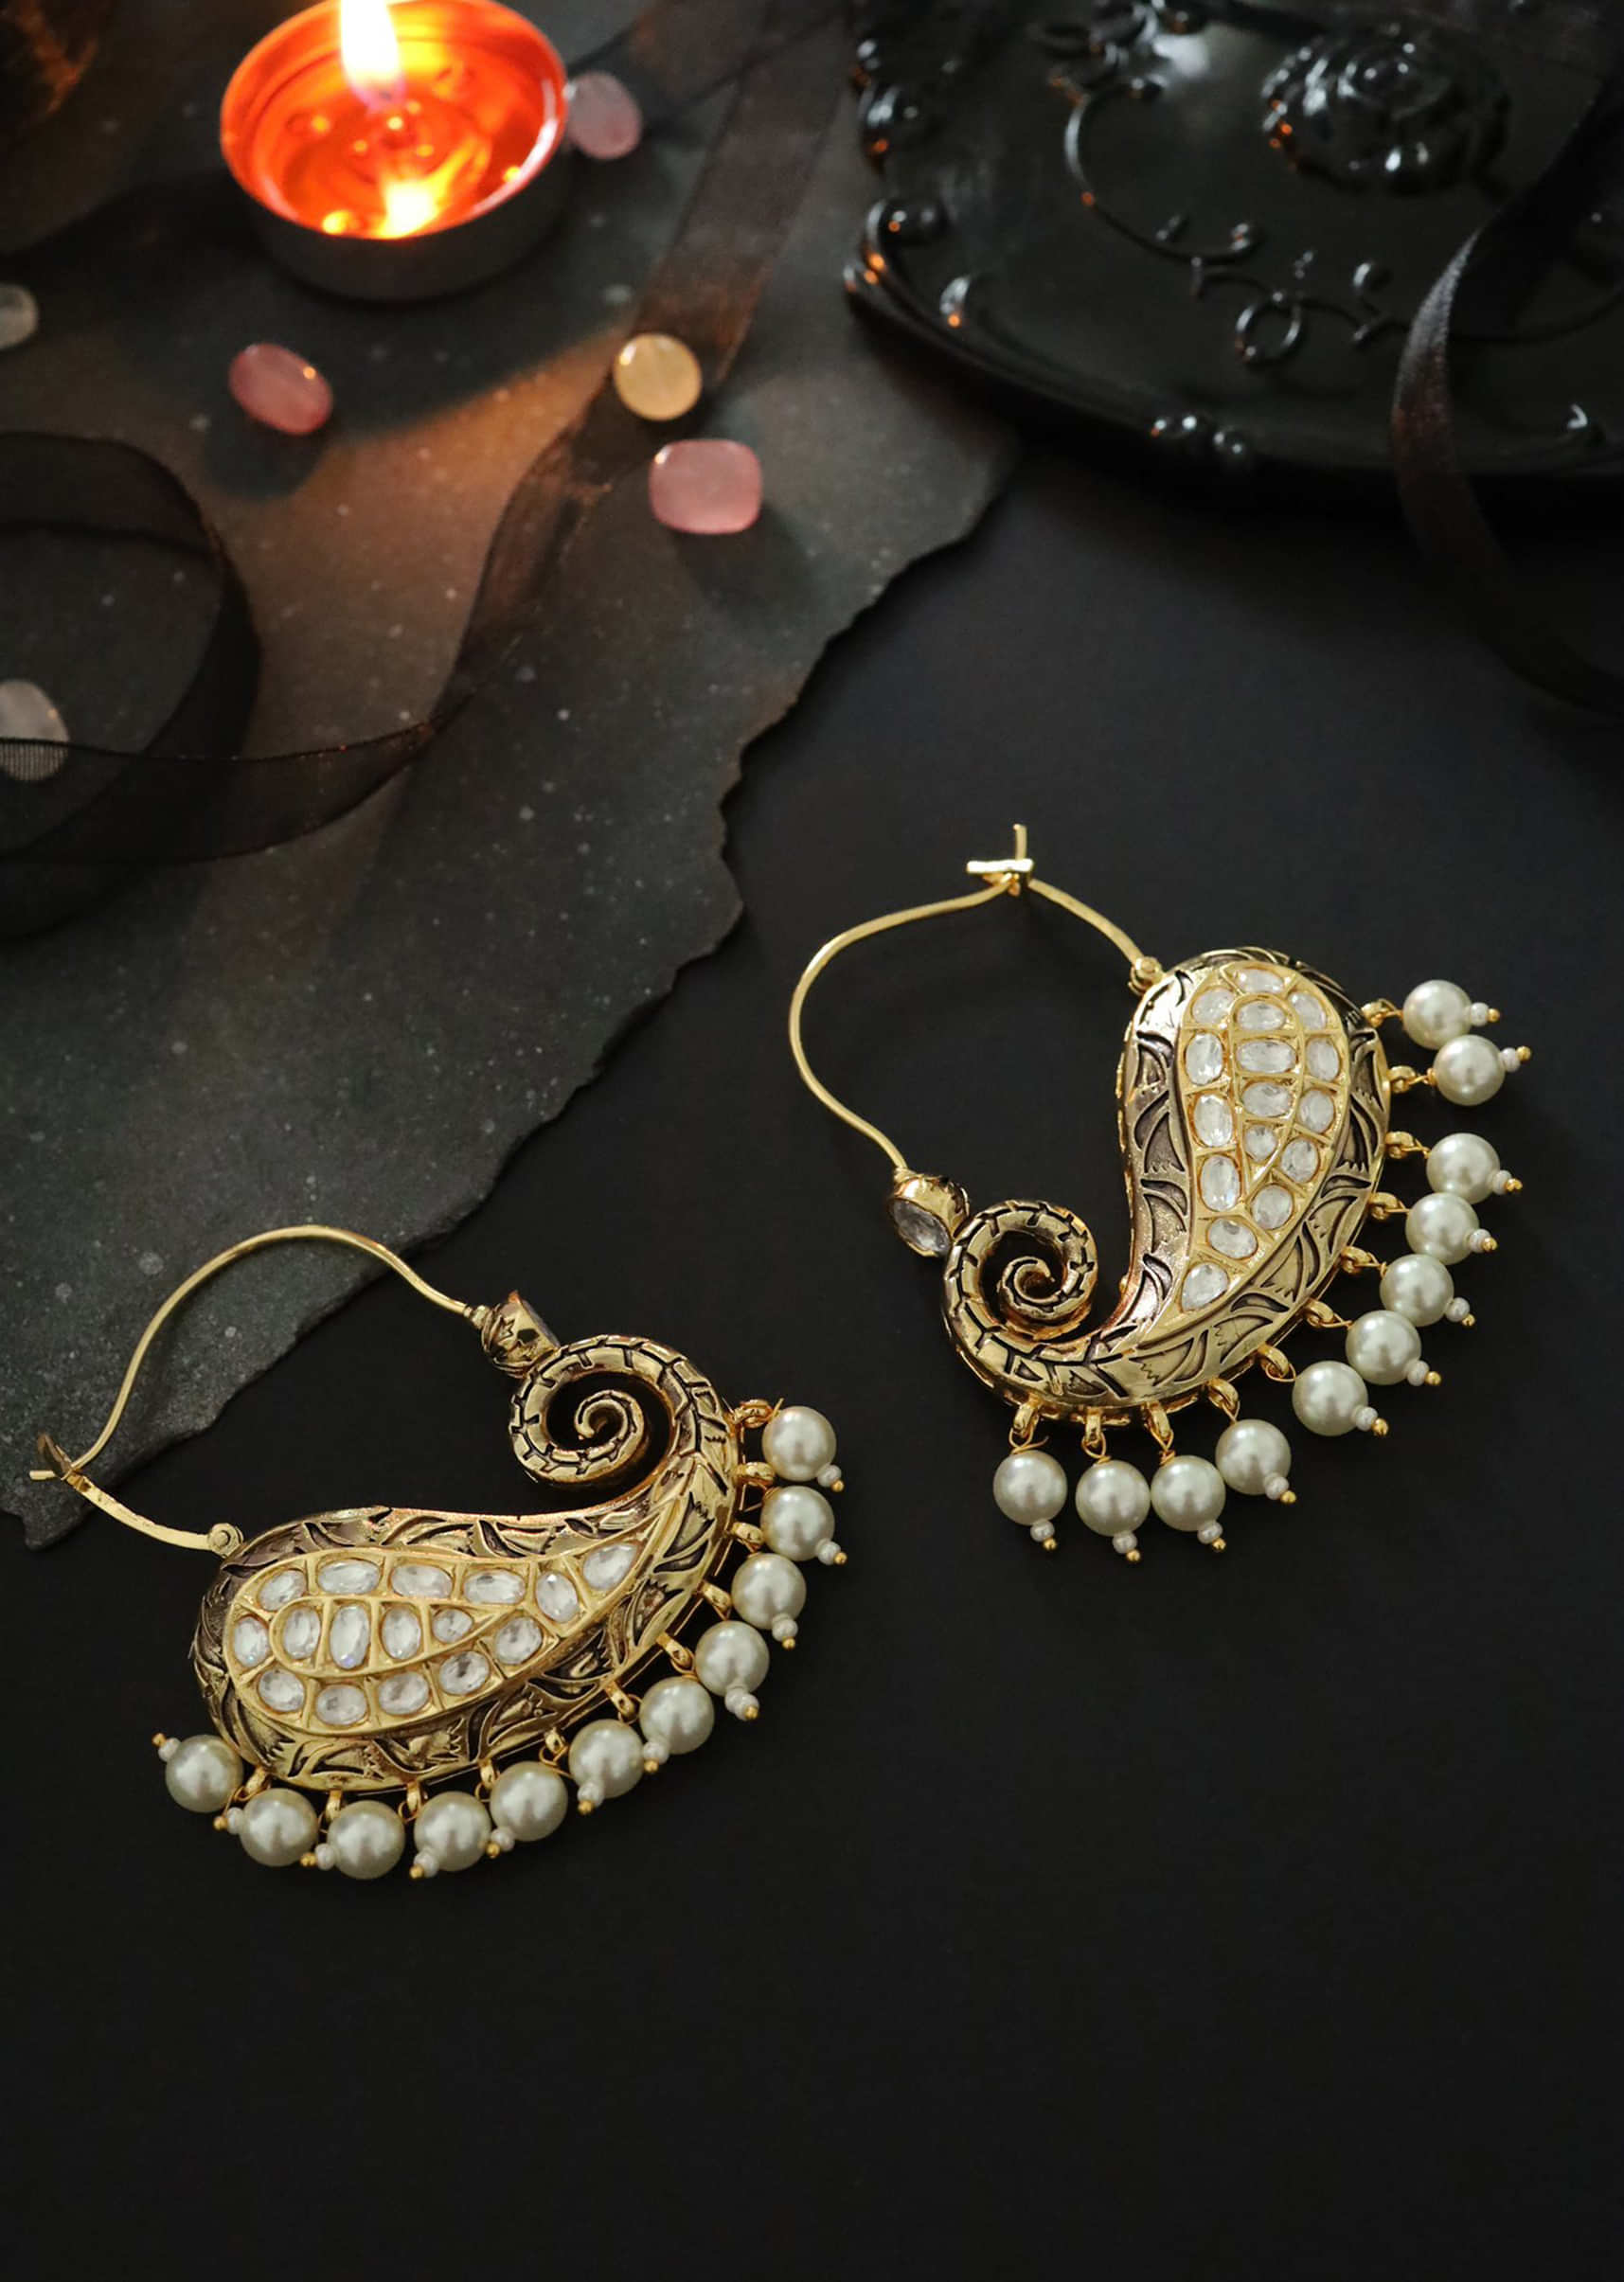 Gold Plated Earrings Featuring Kundan, Minakari And Embossed Intricate Pattern By Paisley Pop